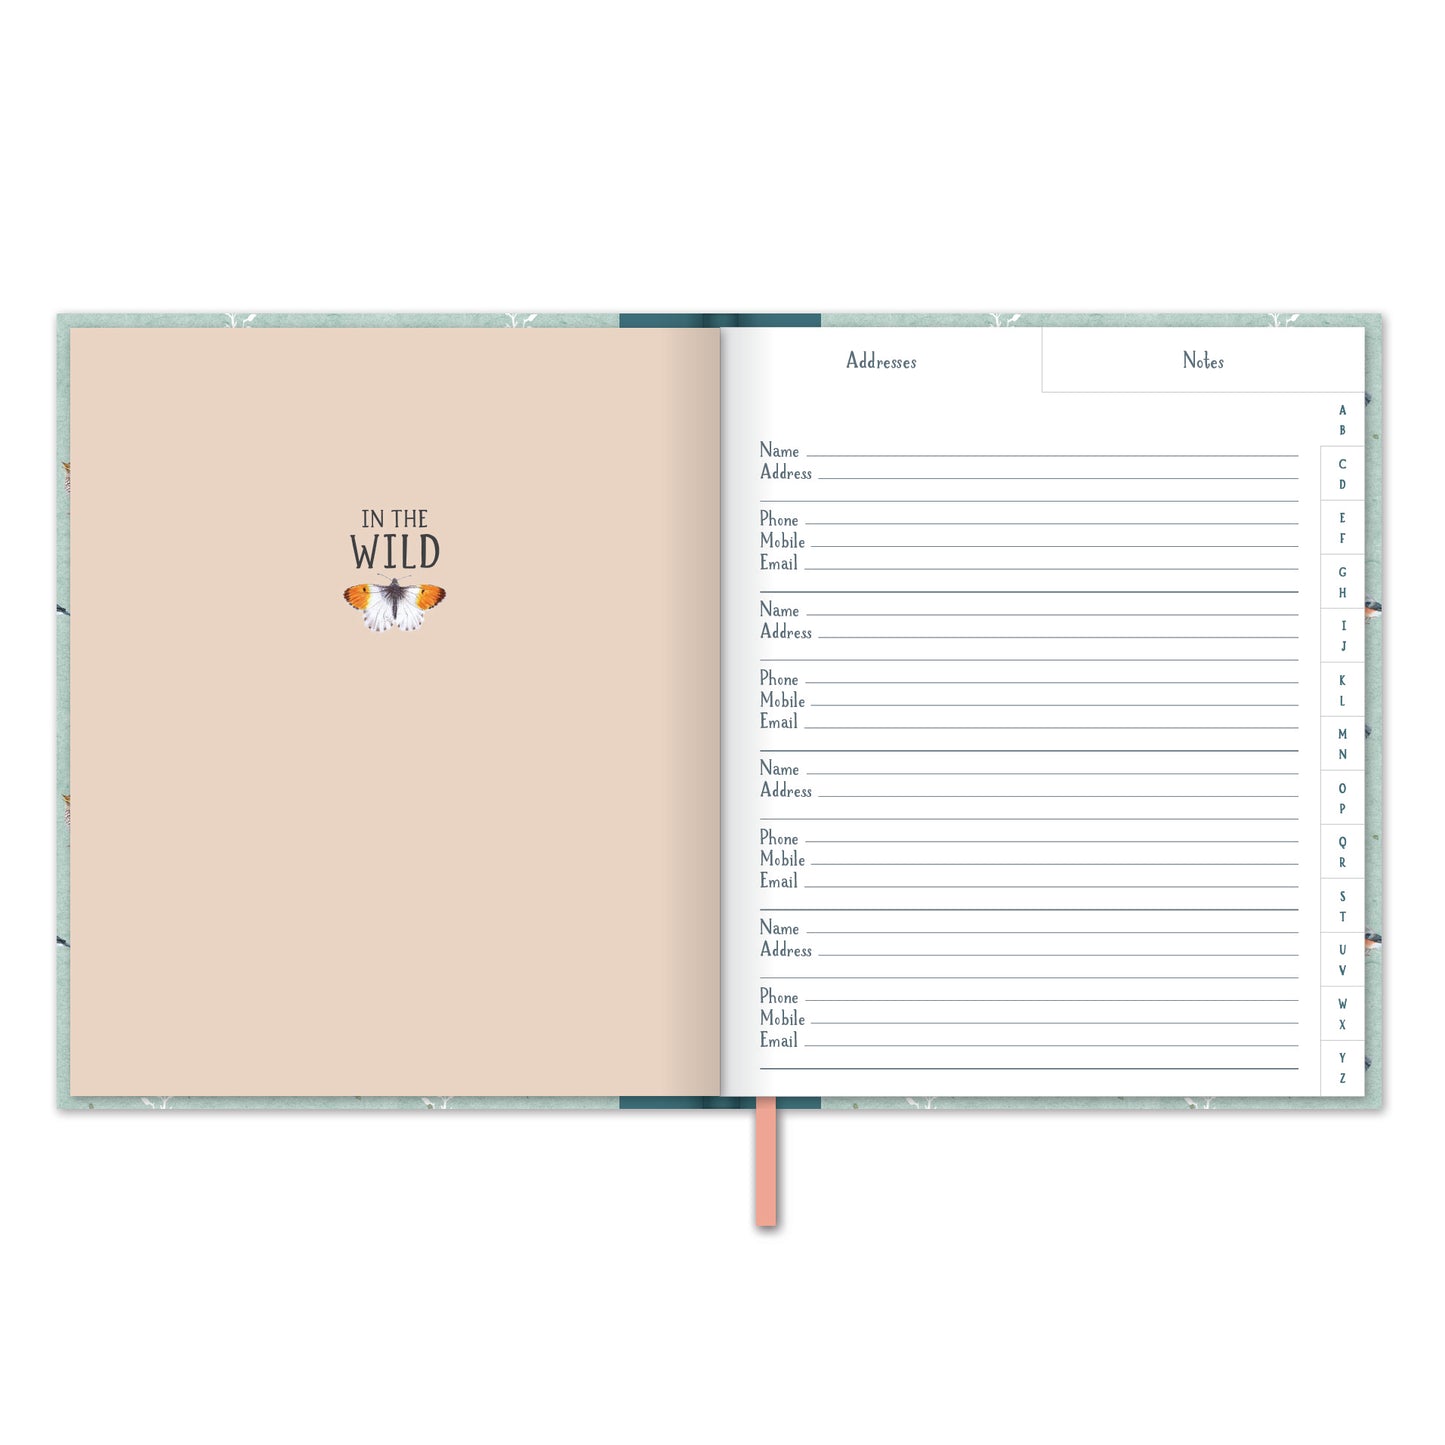 RSPB - In The Wild Stationery - A5 Address Book